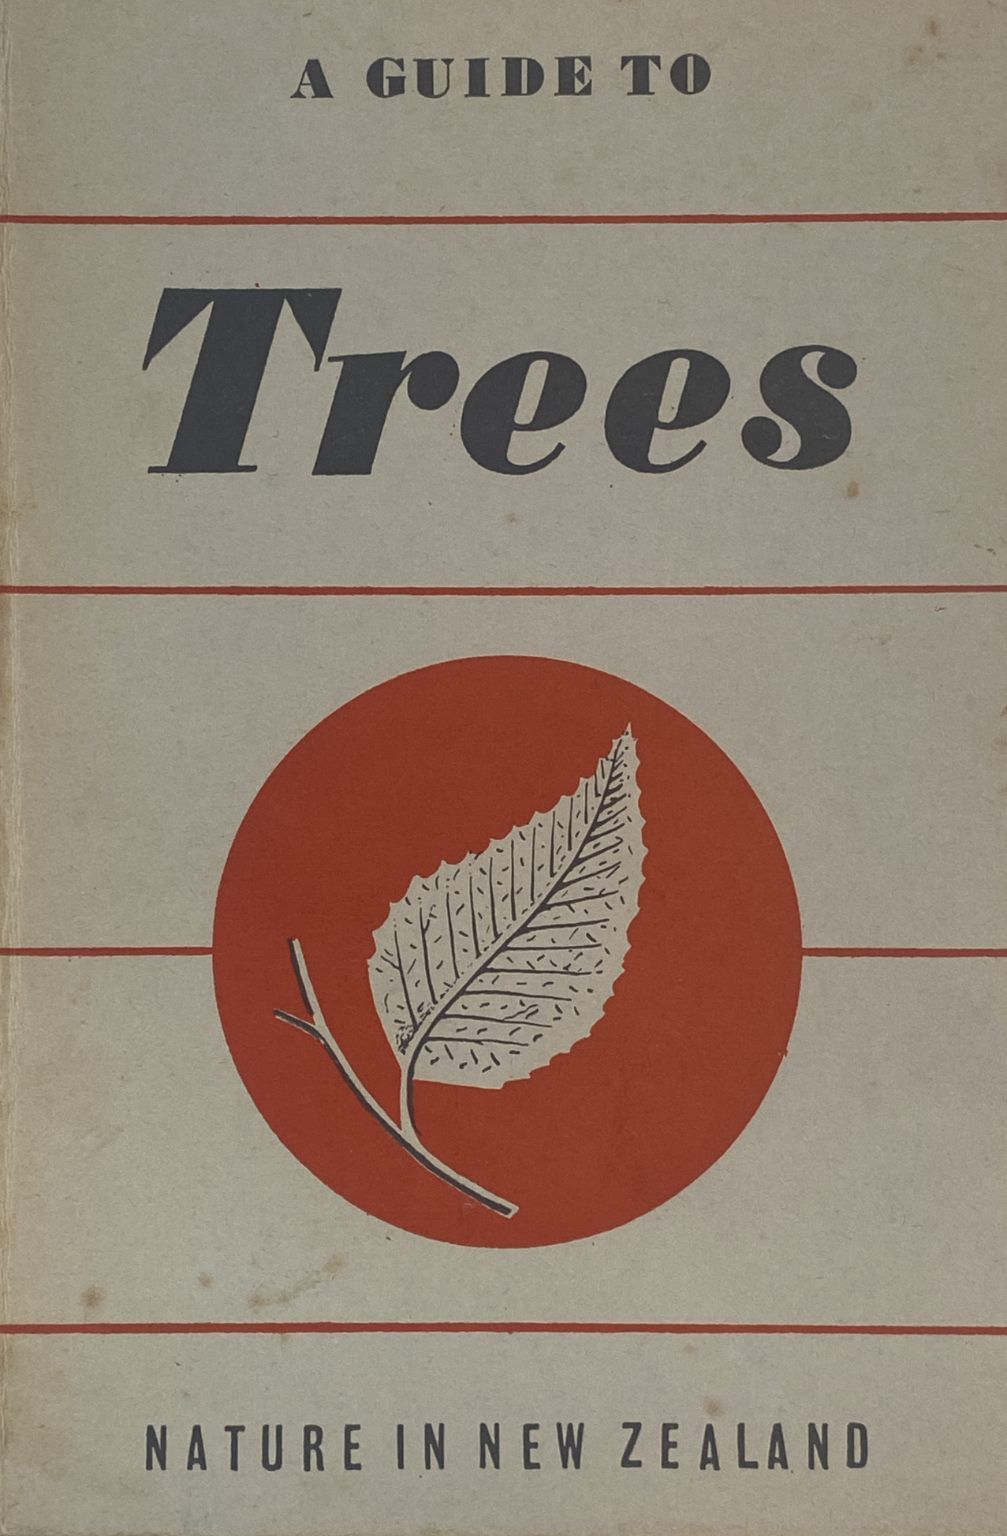 A GUIDE TO TREES